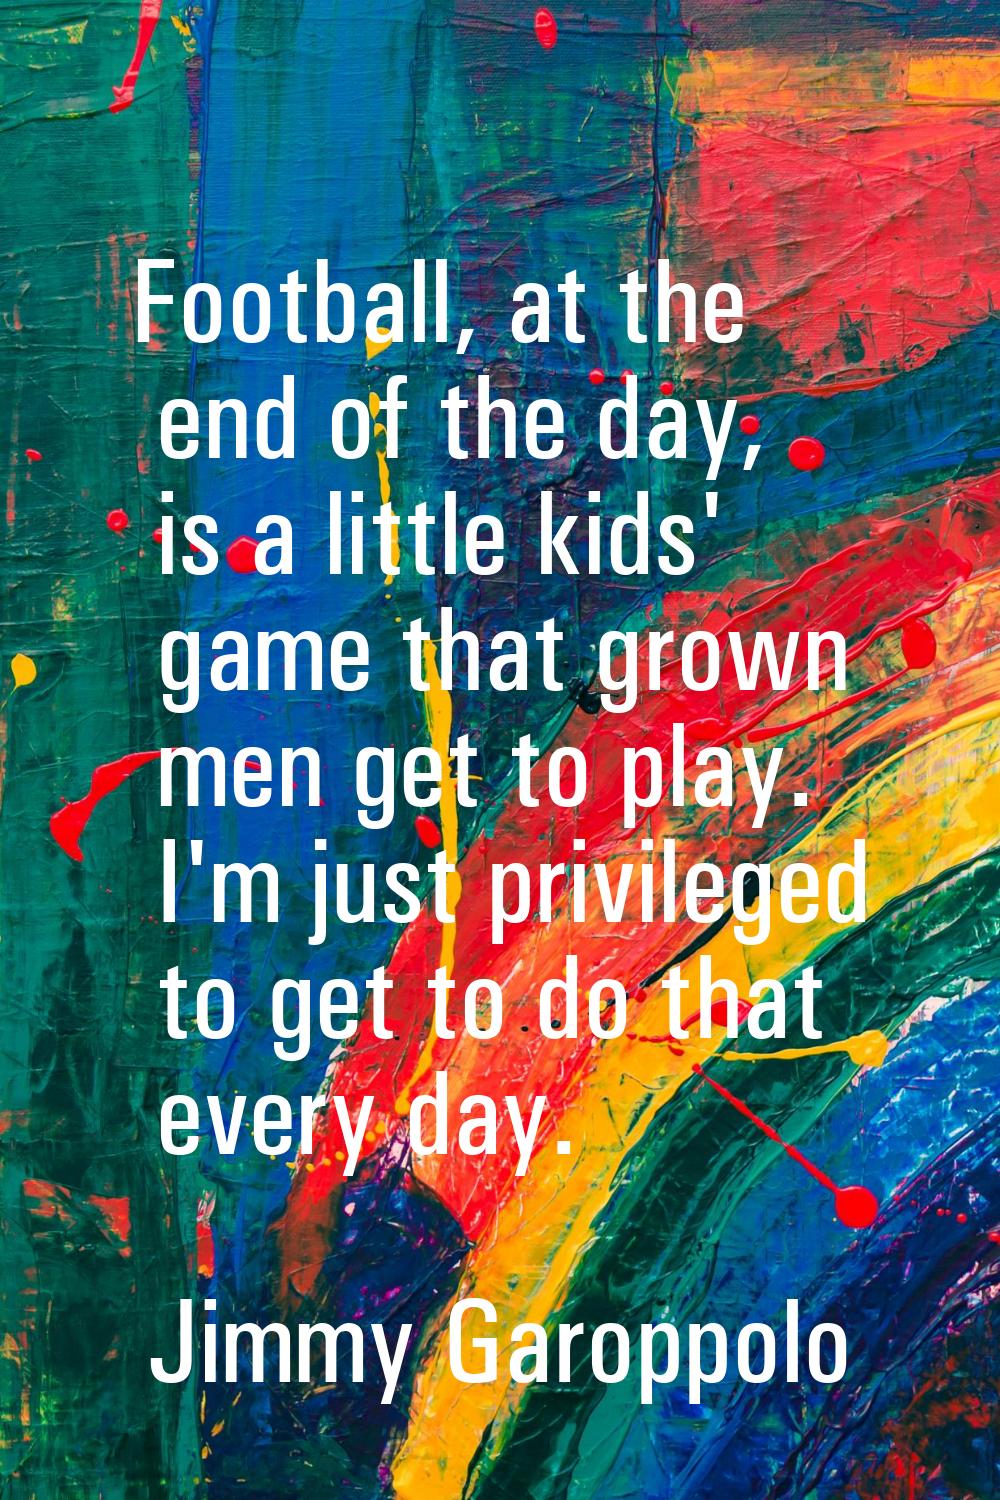 Football, at the end of the day, is a little kids' game that grown men get to play. I'm just privil